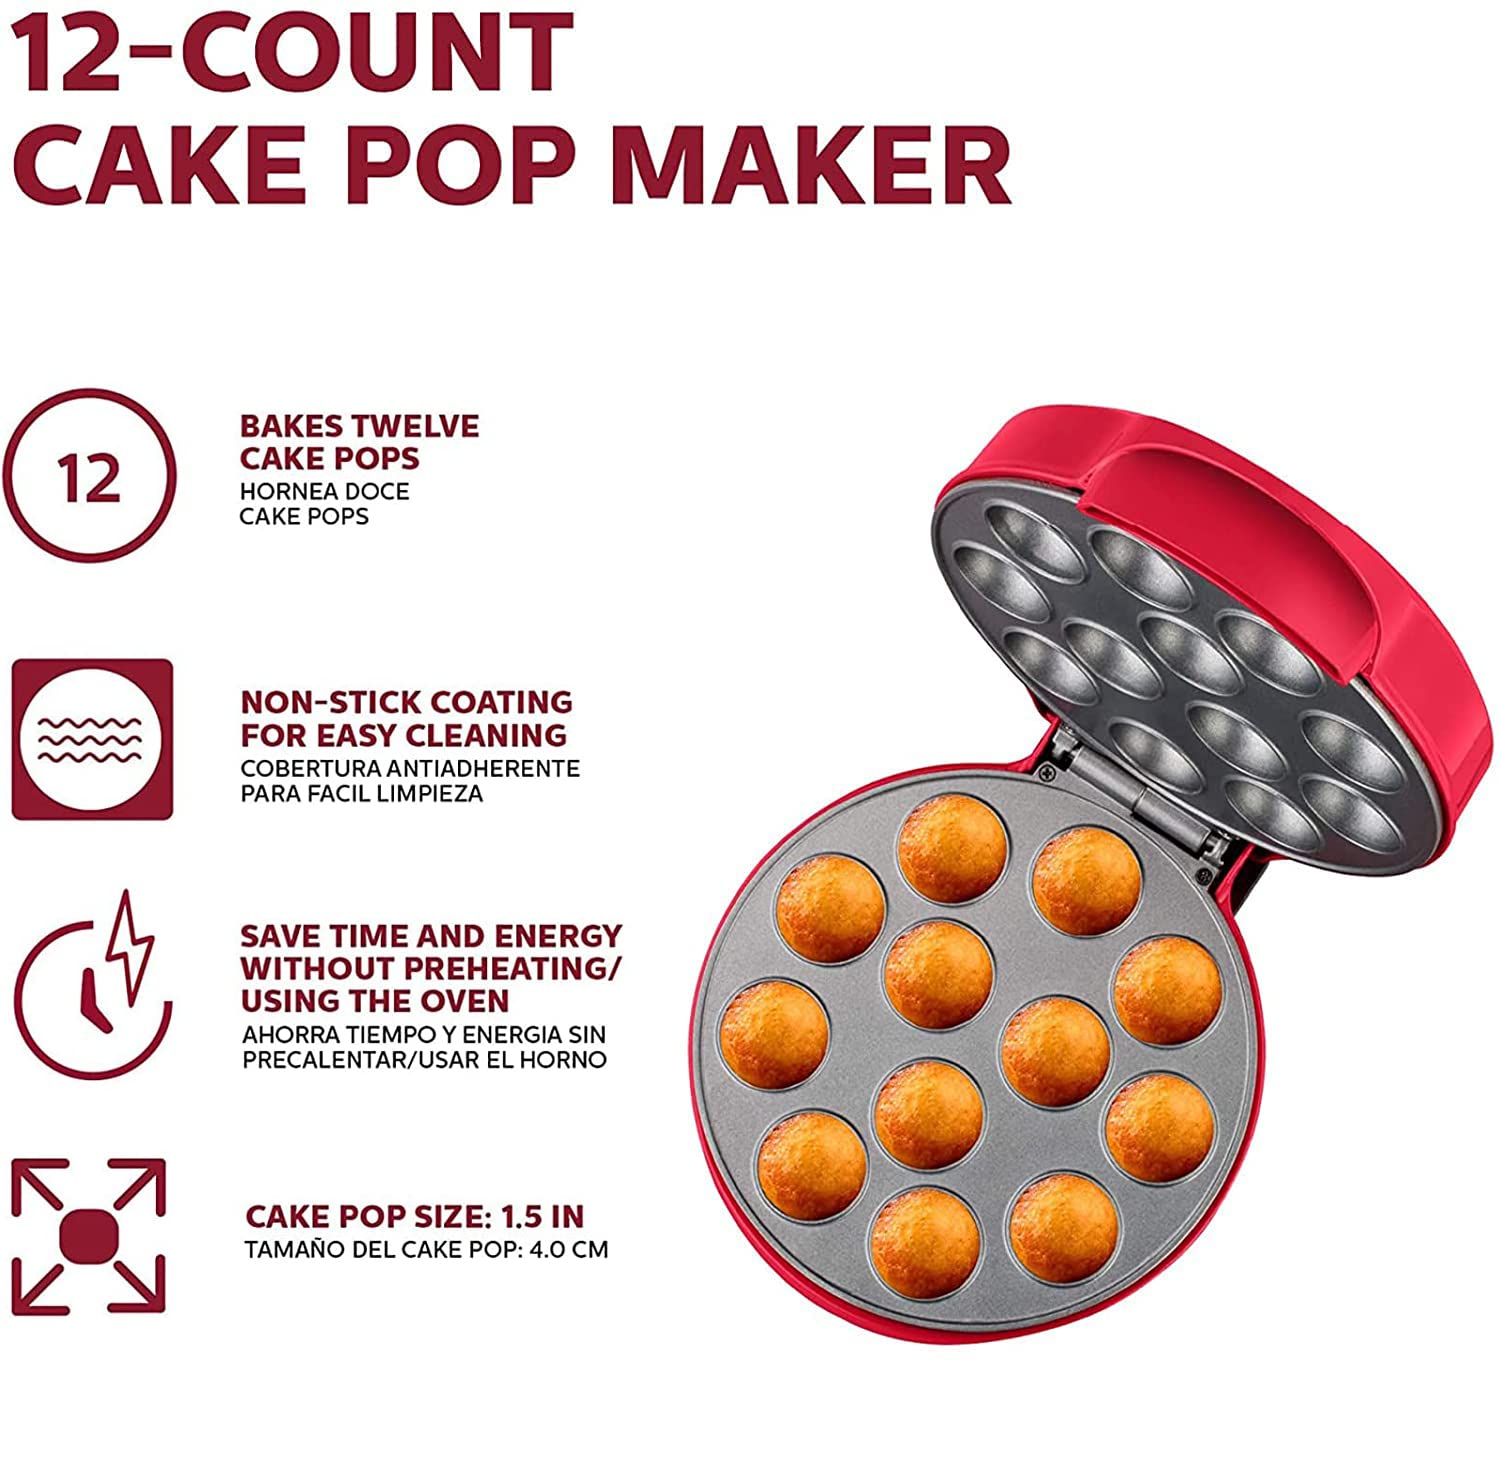 Holstein Housewares Cake Pop Maker, Red - Makes 12 Cake Pops, Non-Stick Coating, Perfect for Birthday and Holiday Parties